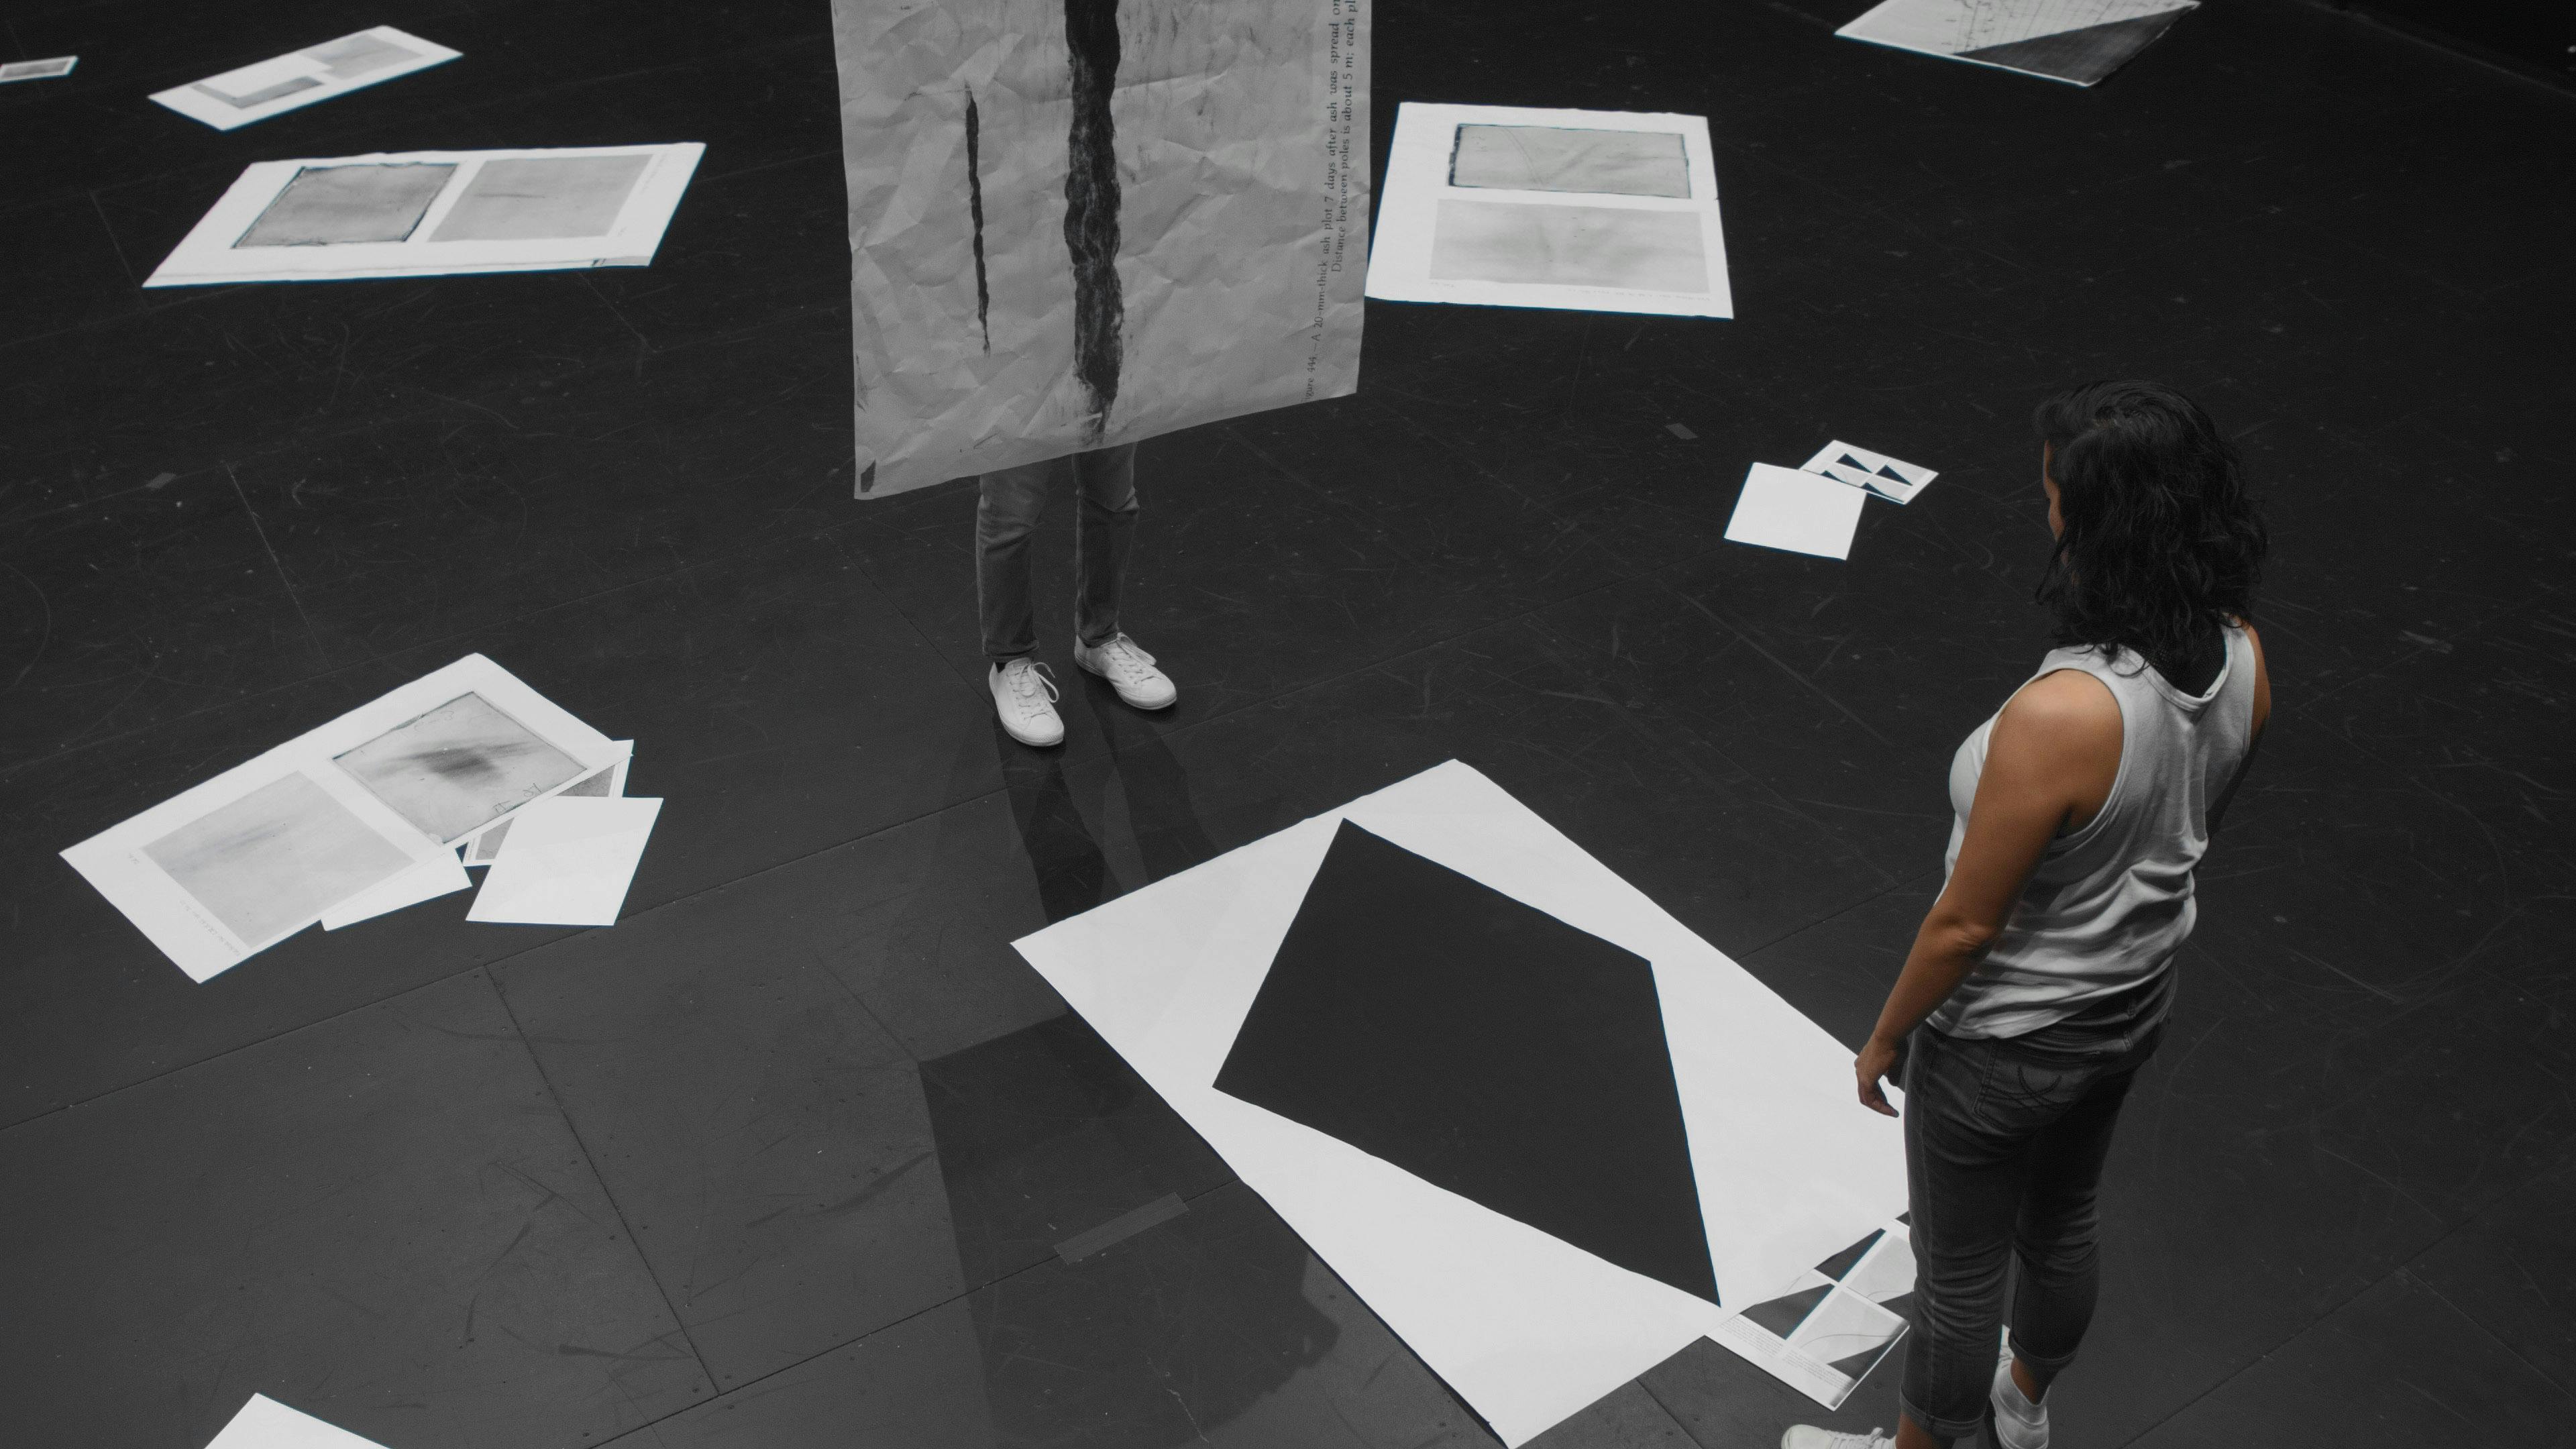 An aerial view of a person with a black hair standing in front of an artwork placed on the floor. The work is a large paper with a diamond- shaped cut-out in the middle.